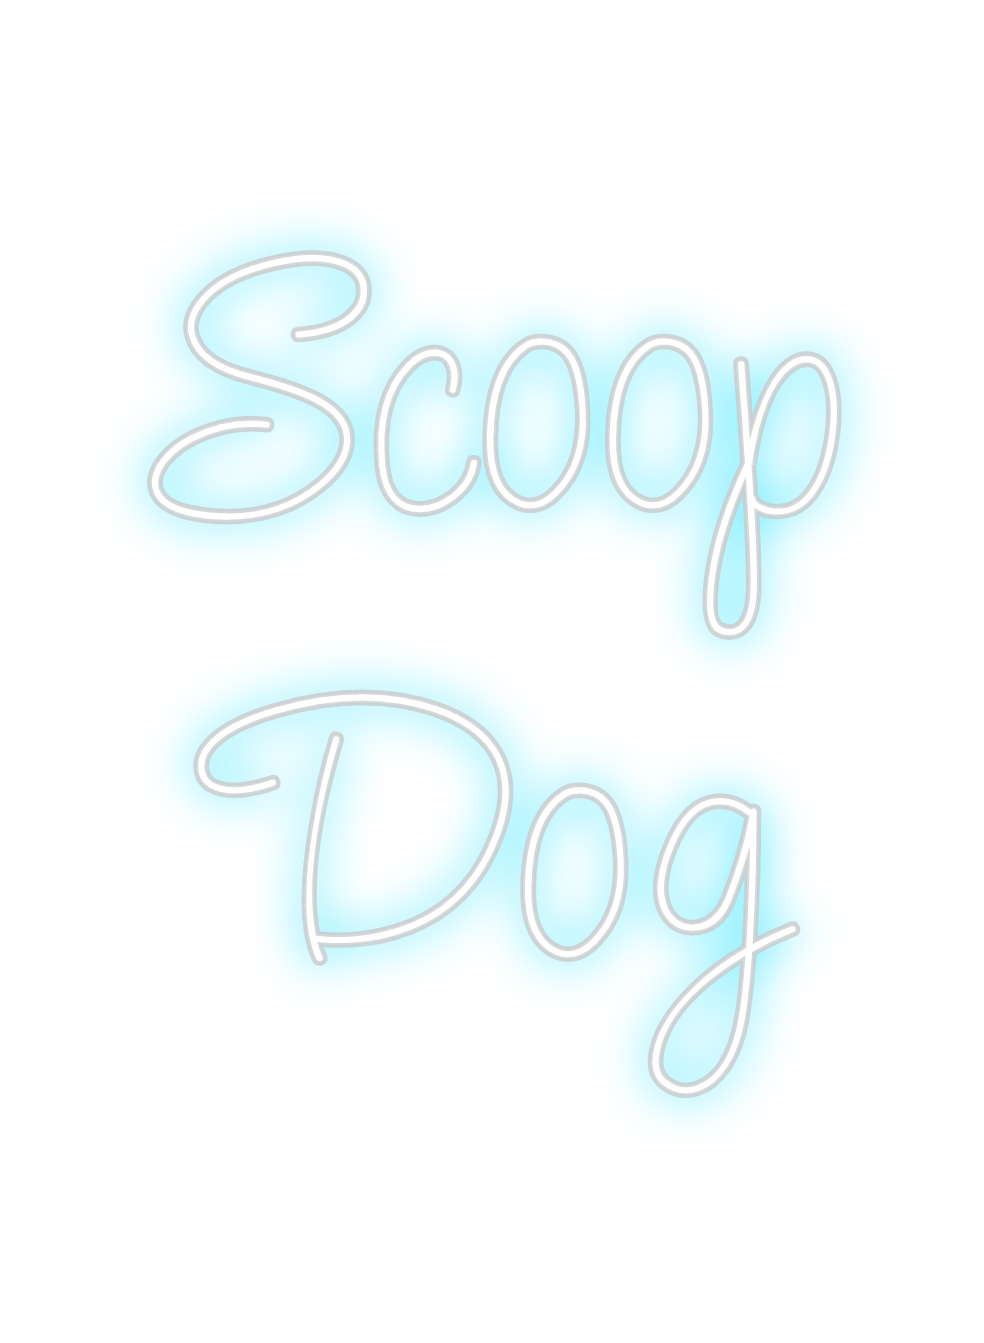 Design Your Own Sign Scoop
Dog